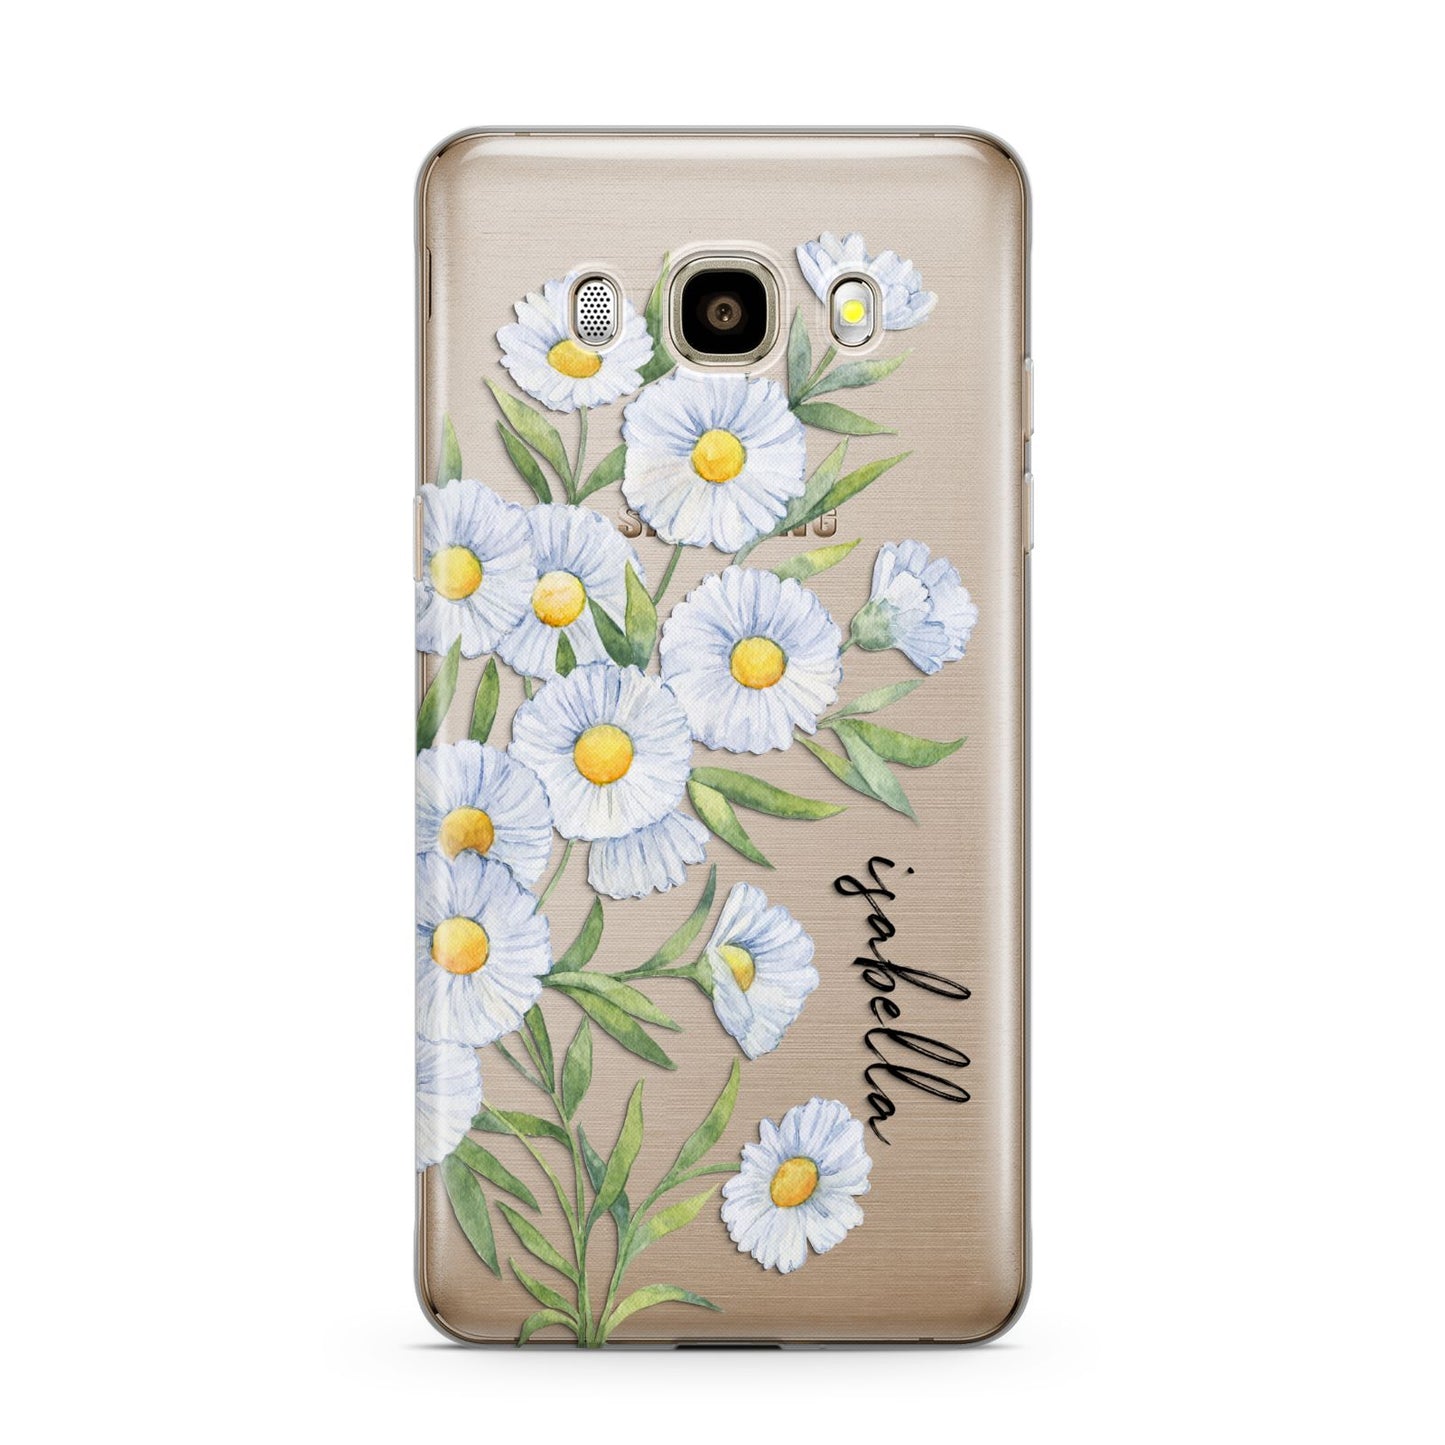 Personalised Daisy Flower Samsung Galaxy J7 2016 Case on gold phone